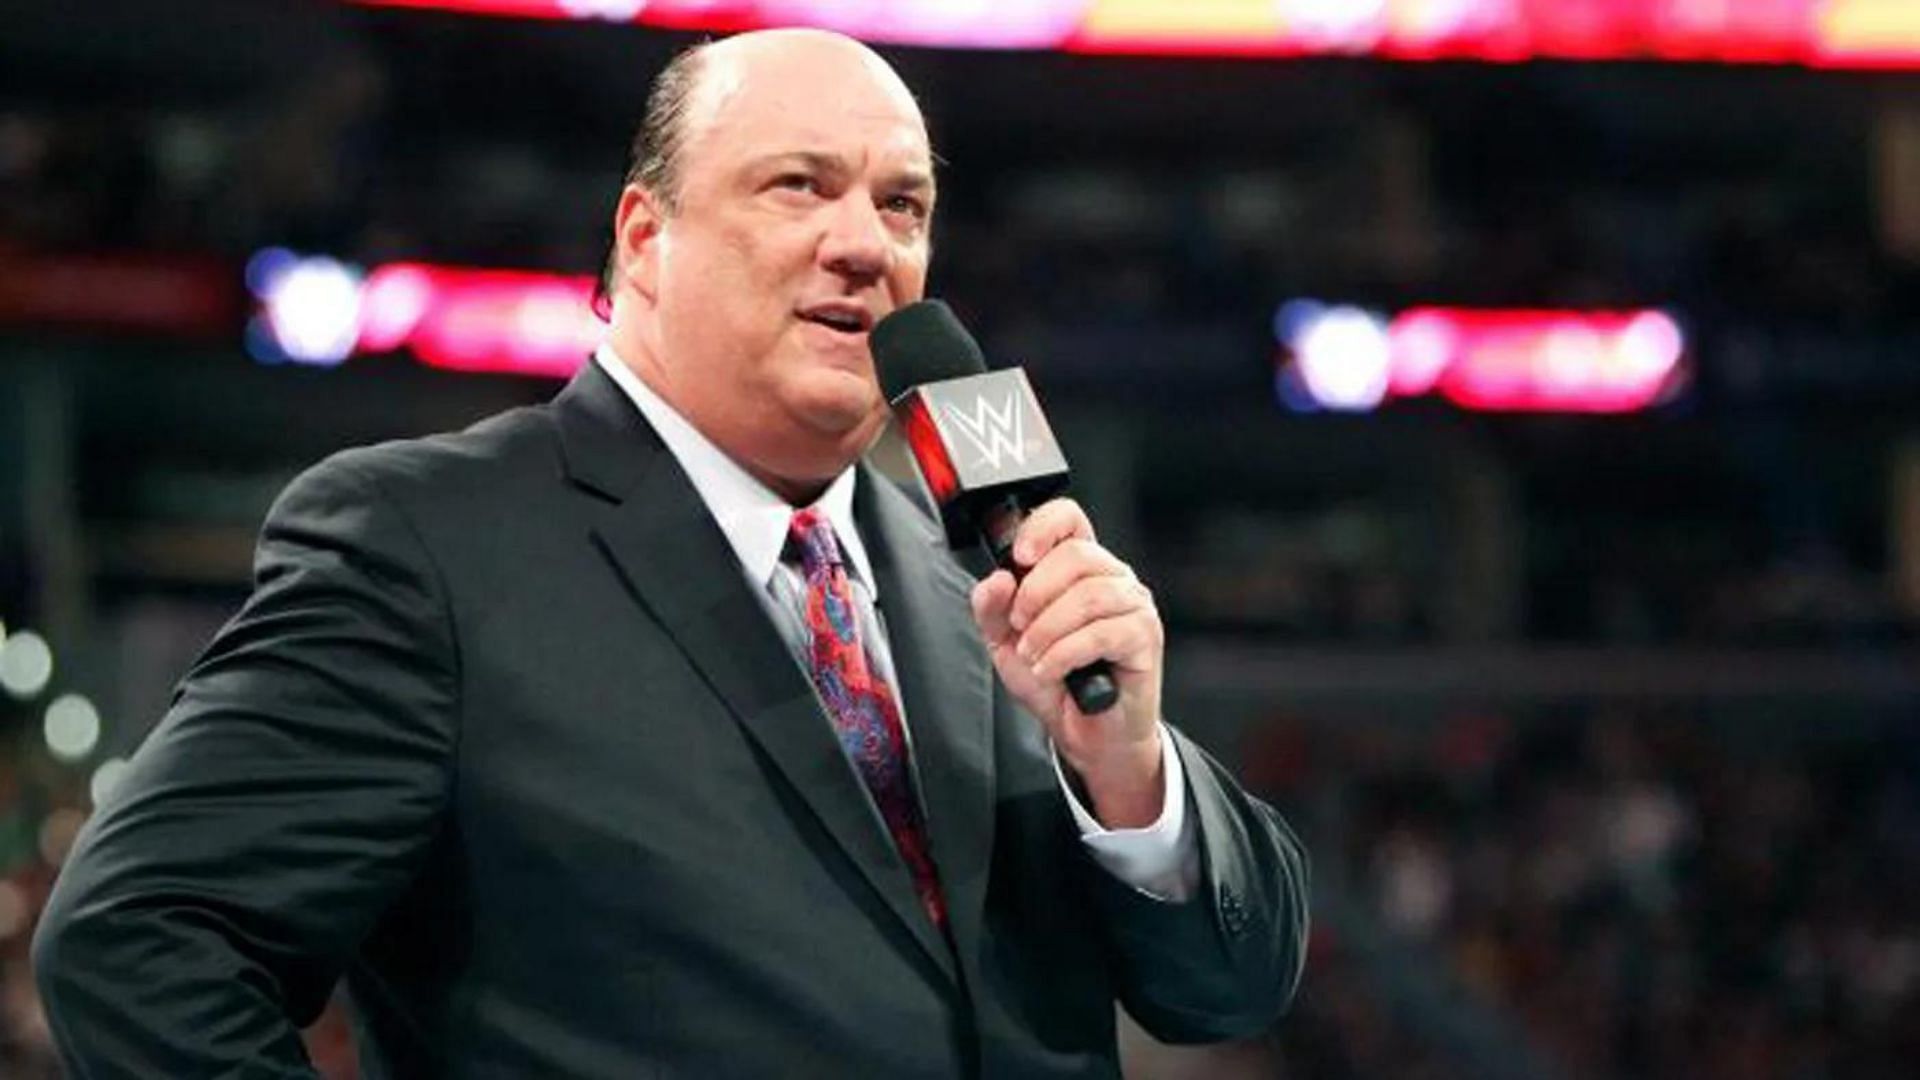 Paul Heyman currently serves as the special counsel to the Tribal Chief Roman Reigns